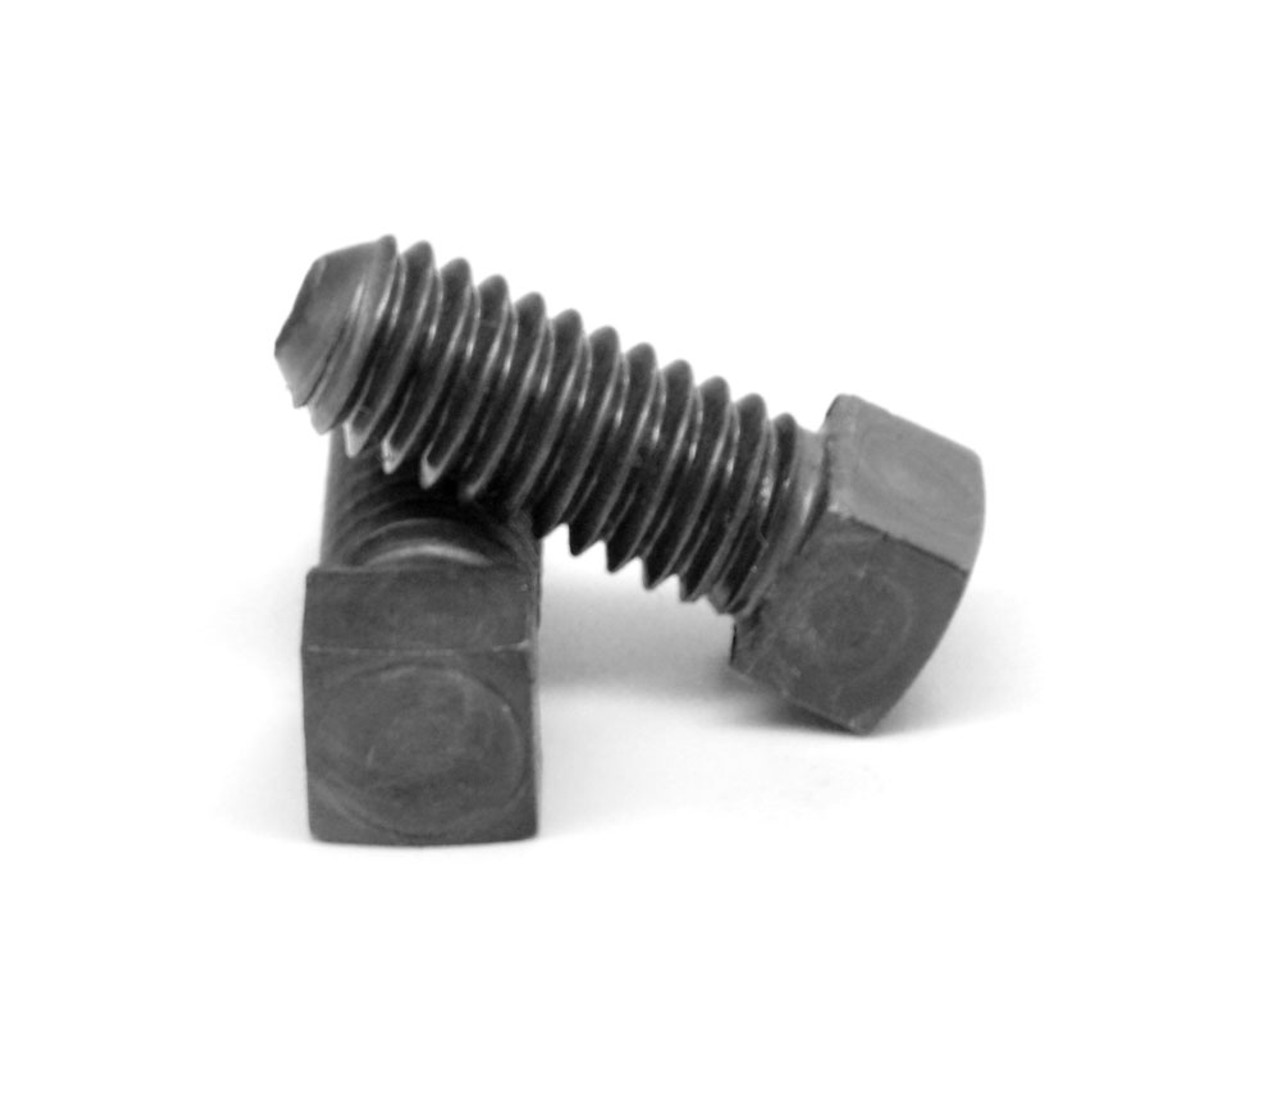 1"-8 x 9" (FT) Coarse Thread Square Head Set Screw Cup Point Low Carbon Steel Case Hardened Plain Finish